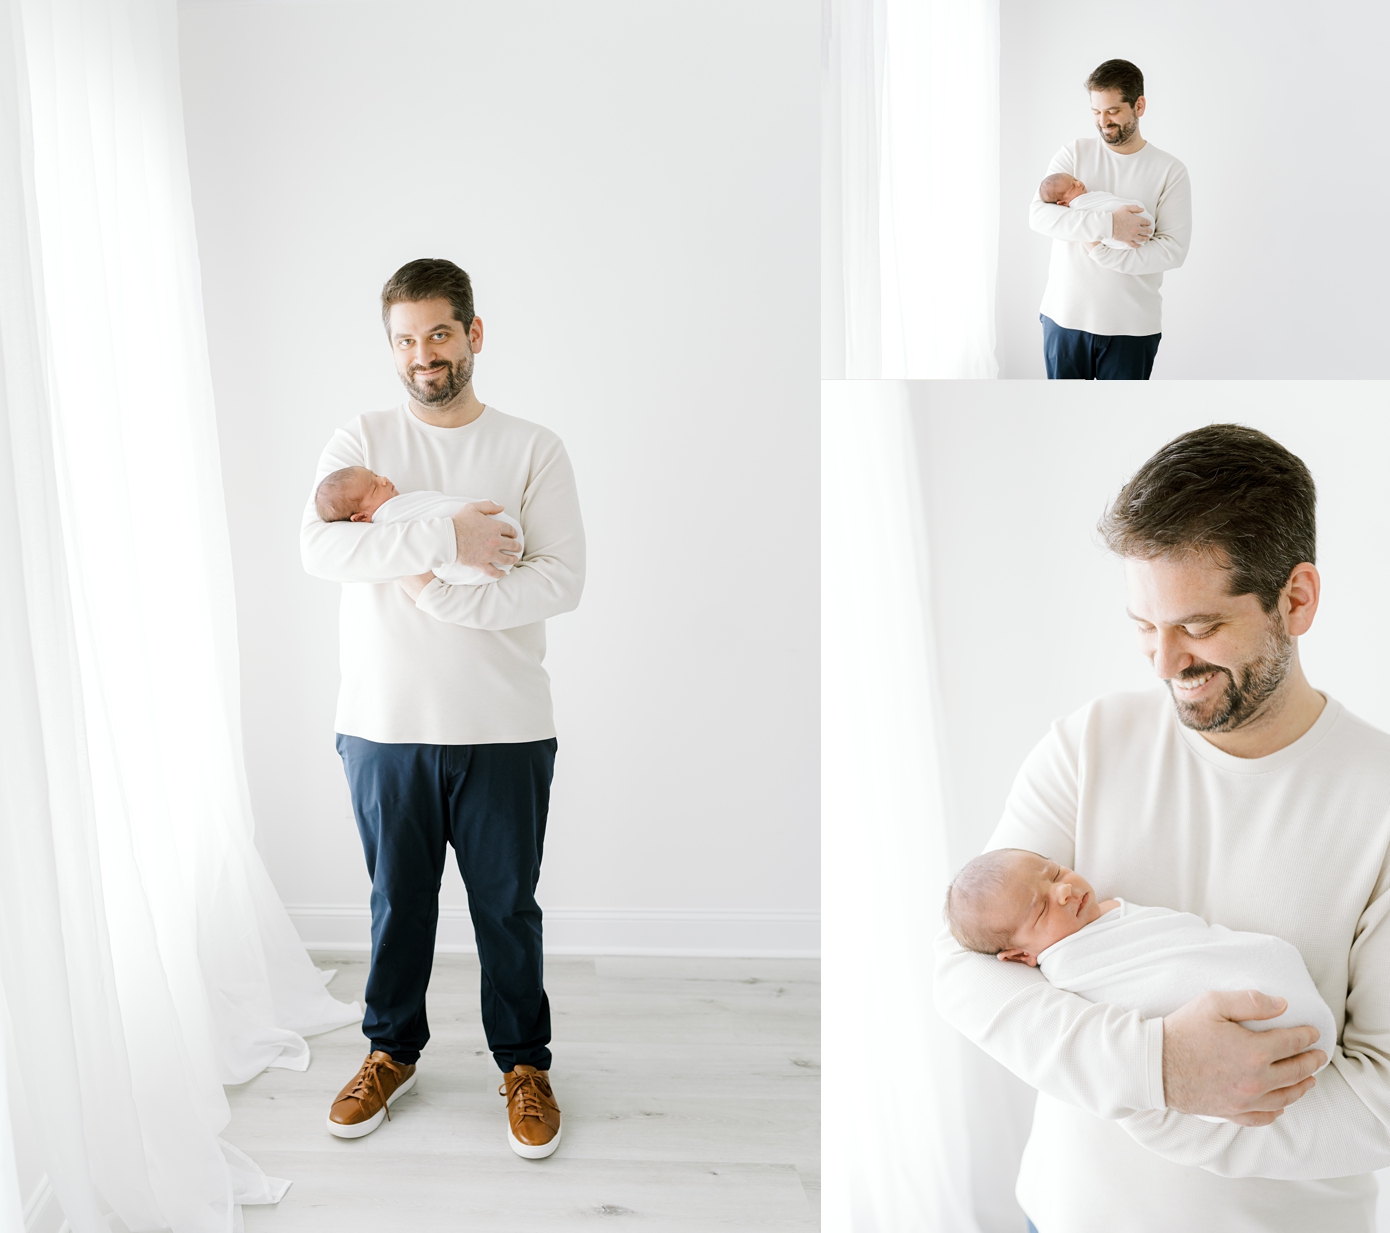 Atlanta Newborn Photography Session in Studio on Whitlock by Lindsey Powell Photography